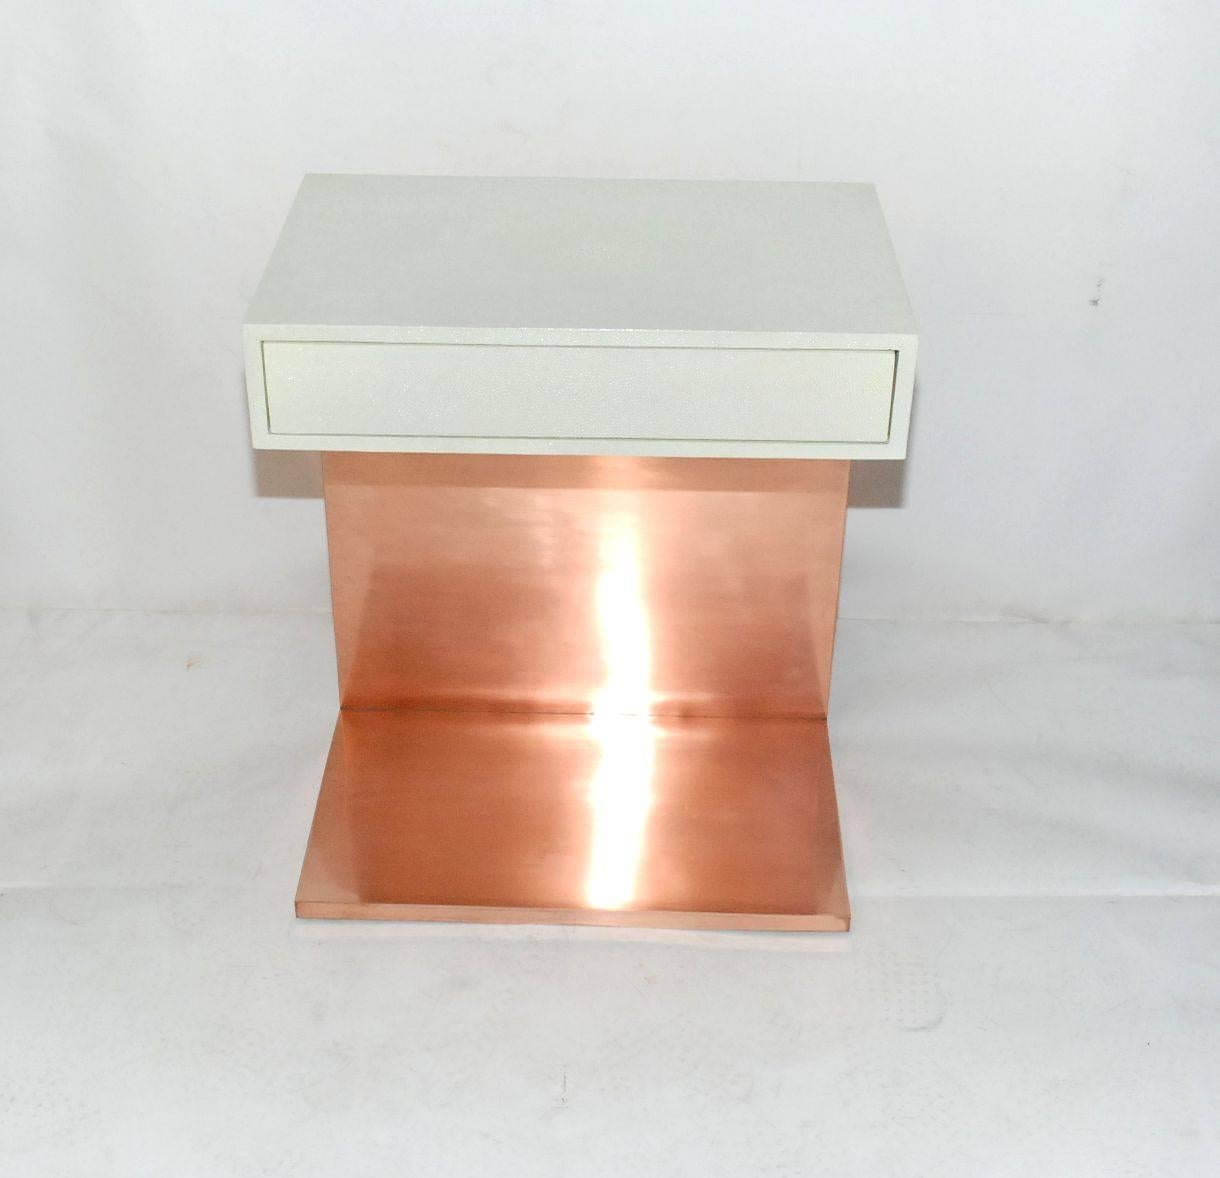 Pair of elegant large side tables or nightstands cover front and back with white shagreen and copper finish on solid brass. Each table has single drawer.